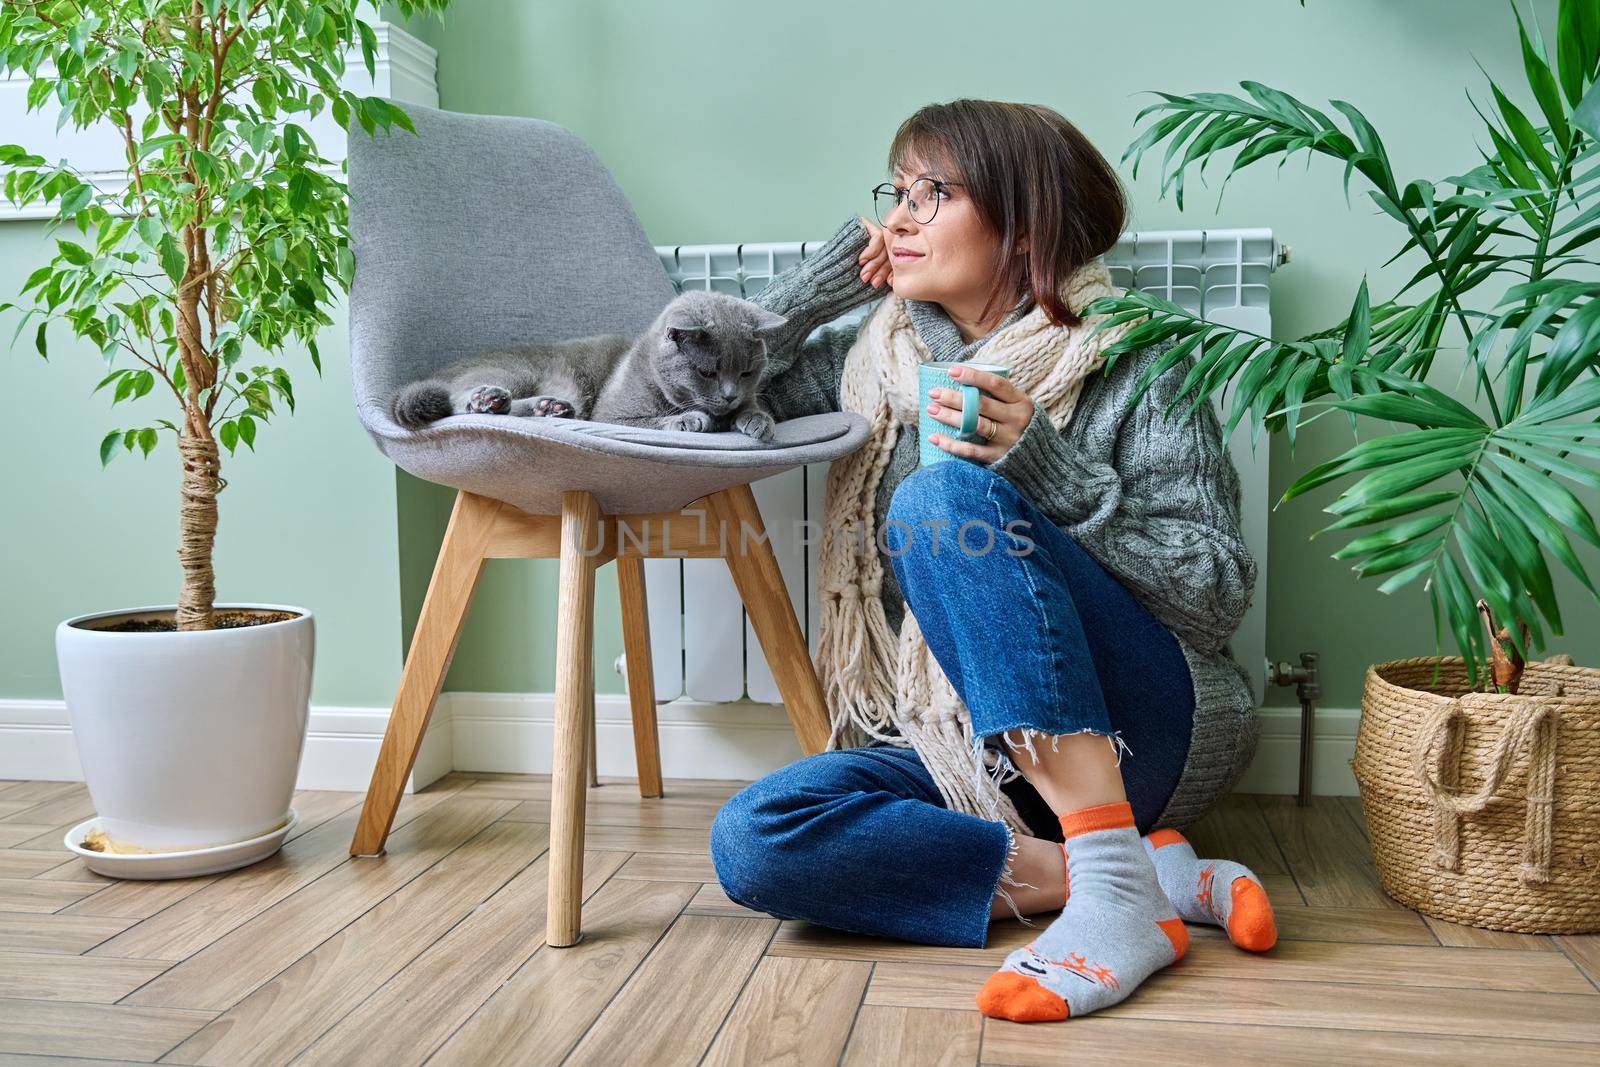 Cold winter season woman with cat near heating radiator. Middle-aged female in warm woolen knitted sweater with cup of hot drink and pet lying on chair. Heating season, lifestyle, crisis energy saving